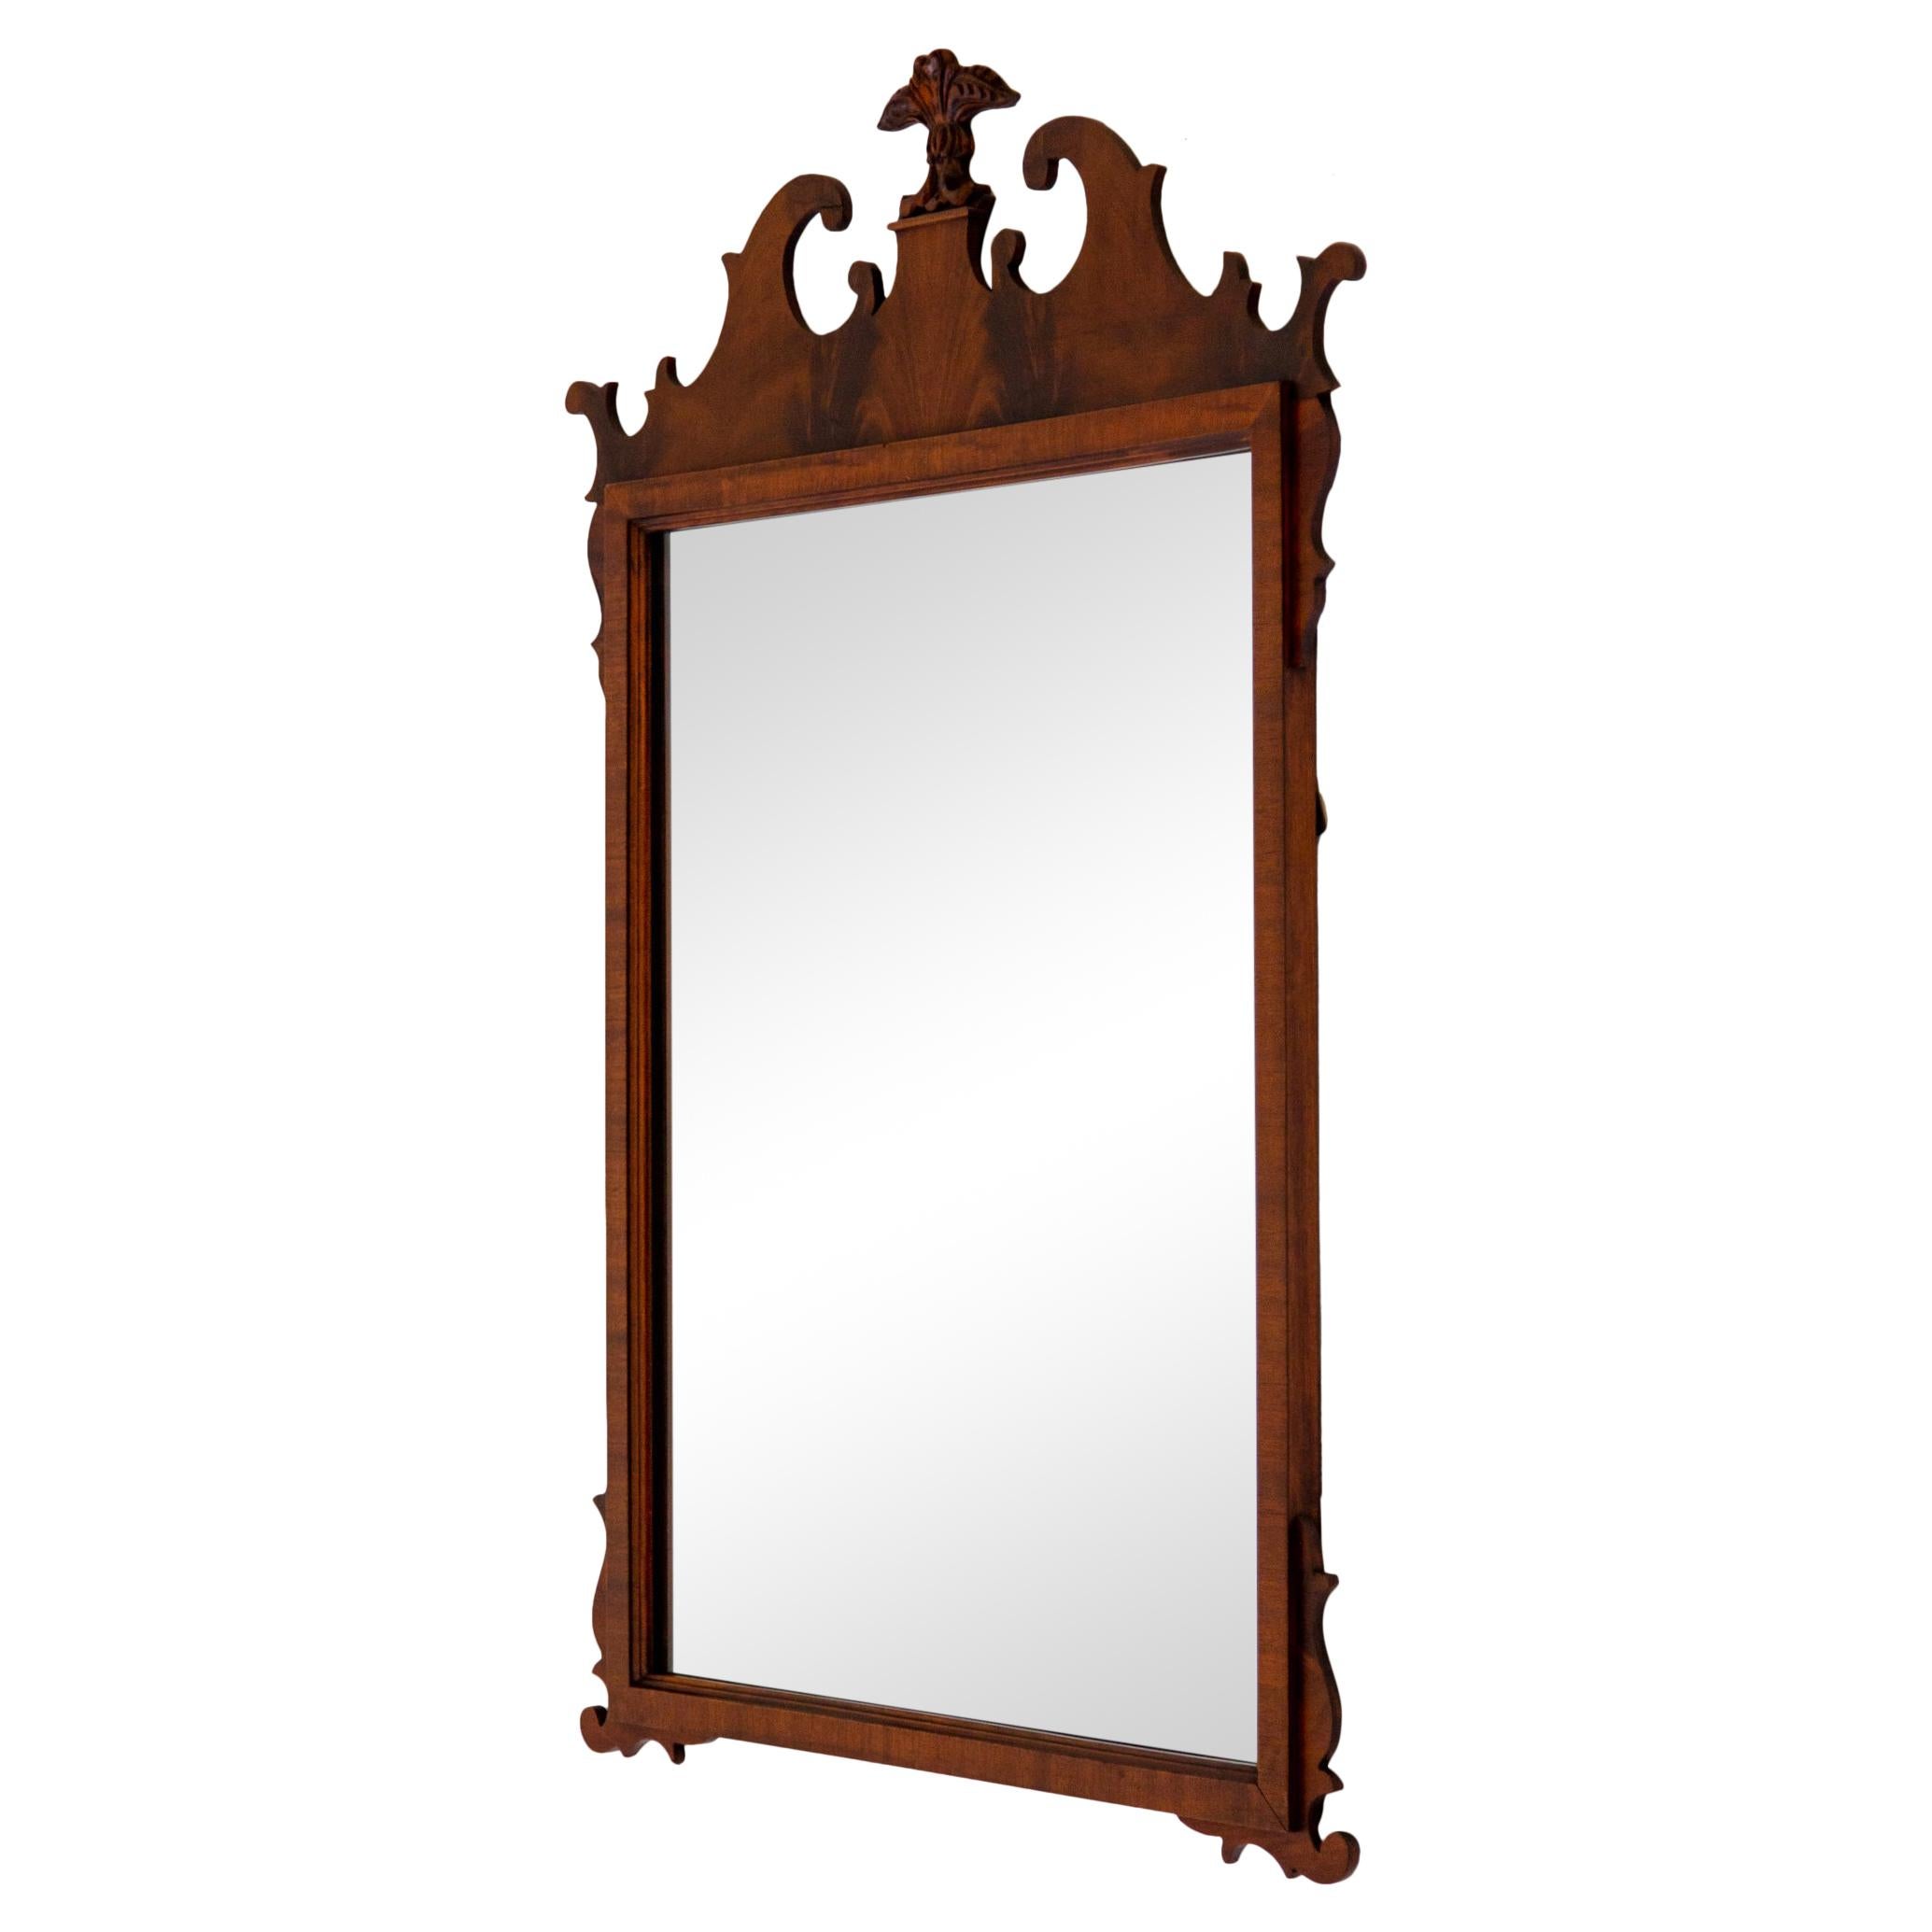 Vintage flame mahogany Chippendale style mirror with Prince of Wales three-feather crest, circa 1940s. Mirror inside frame measures 21